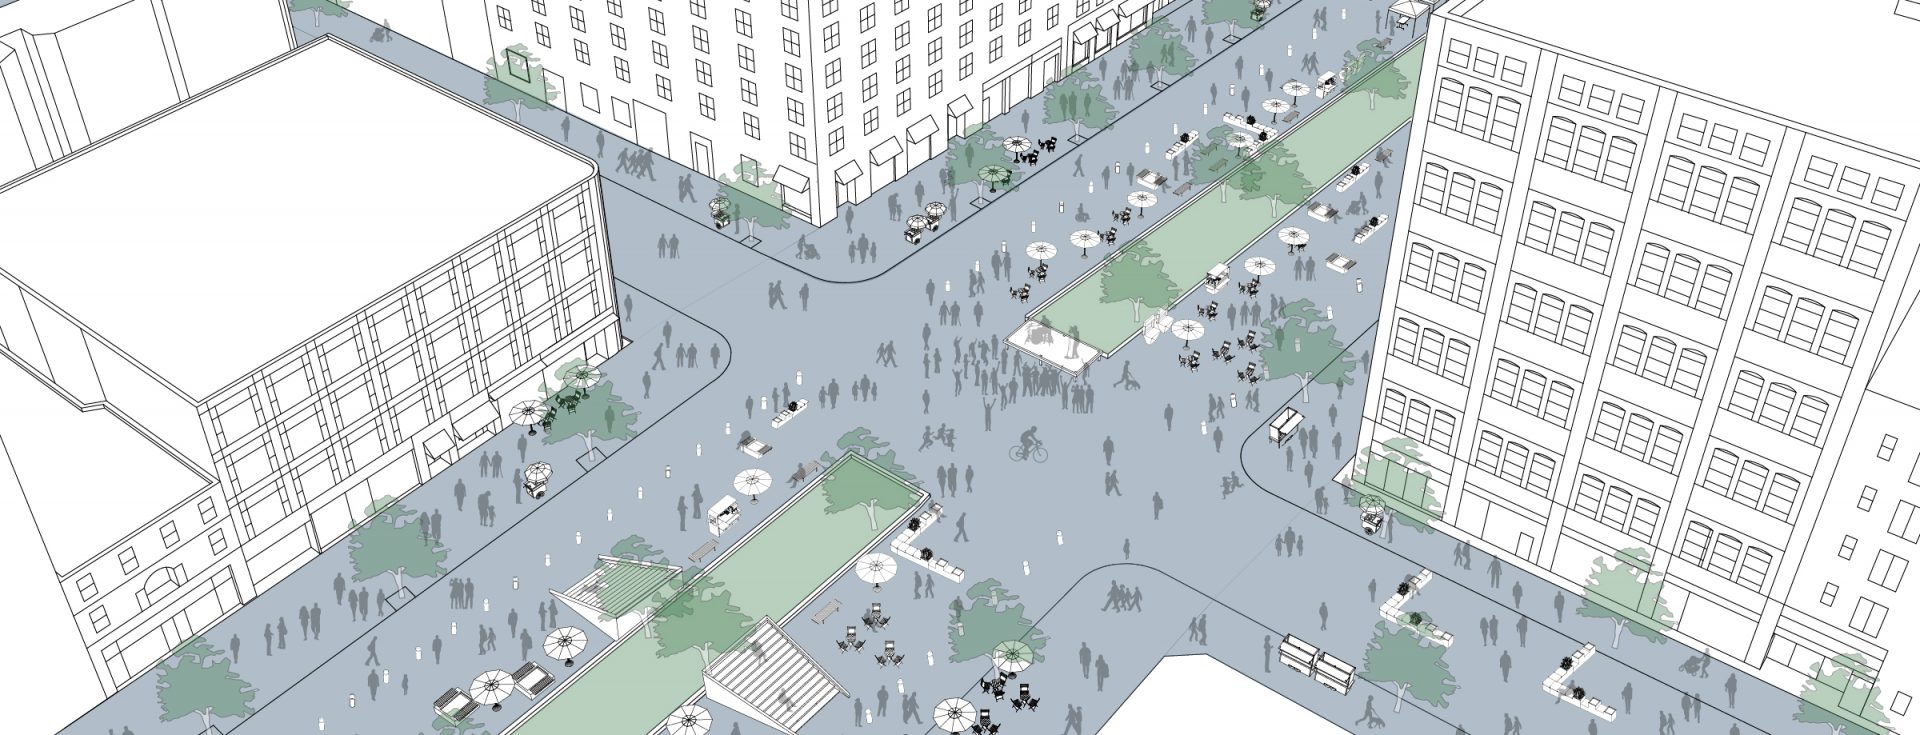 Street Plans to Create Public Space Stewardship Toolkit for San Francisco